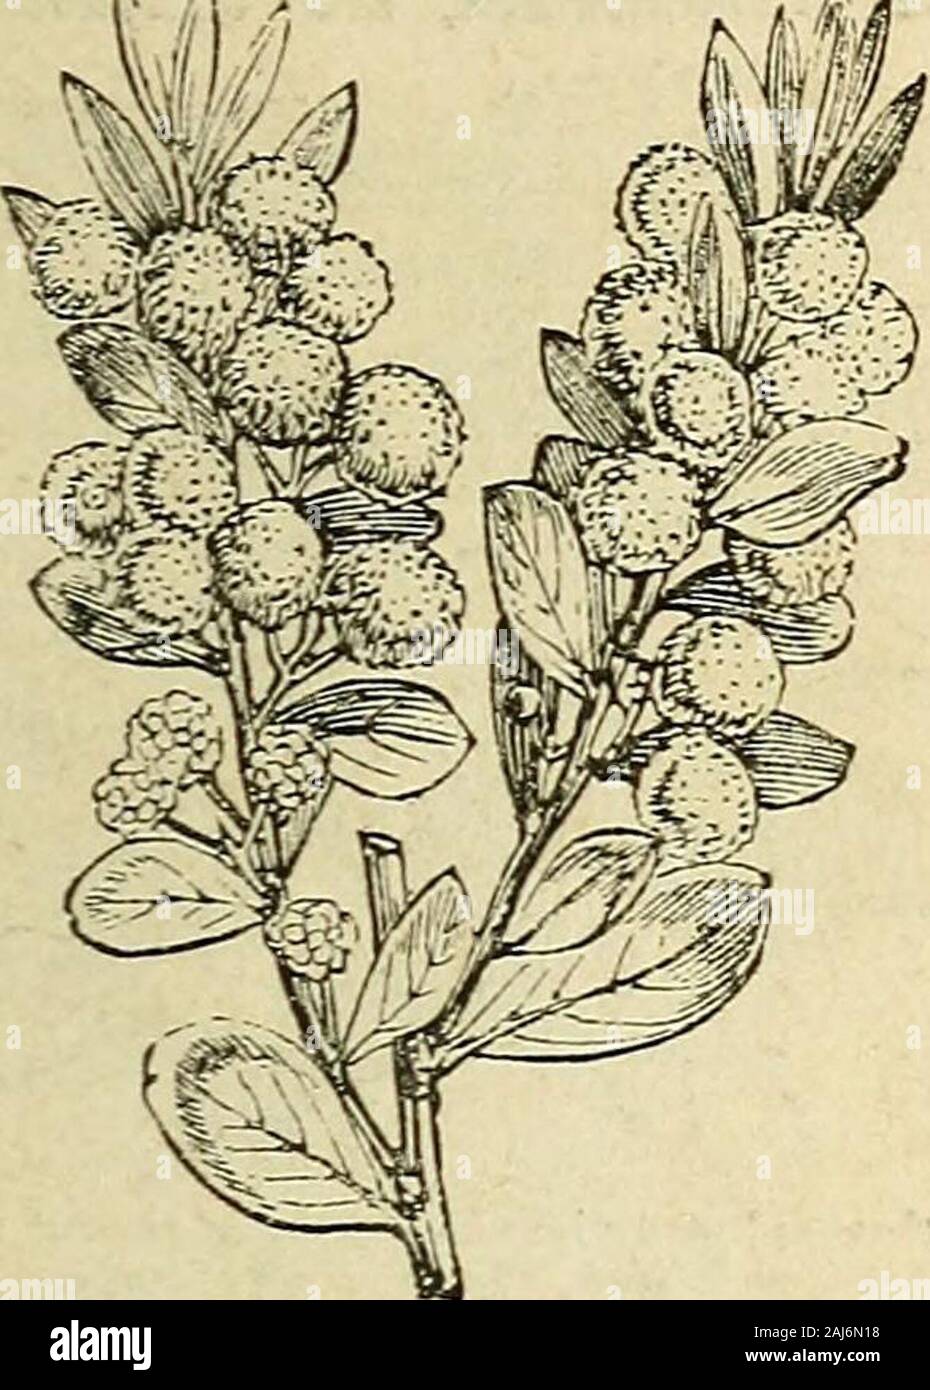 The treasury of botany: a popular dictionary of the vegetable kingdom; with which is incorporated a glossary of botanical terms . (JTi)e Crcatfurg of 23atann. [acal ally more or less cjiindrical, and of smalldimensions, becomes flattened out, and as-sumes a leaf-like appearance : these dilatedIe:if-stalks, or, as they are technicallytermed, phyllodes, fulfil the functions ofthe leaves, and are of very varied formin the different species. They are al-ways so placed that their edges look up-wards and downwards, so that by thismeans, as well as by the arrangement ,s **. .Acacia argyrophylla (with Stock Photo